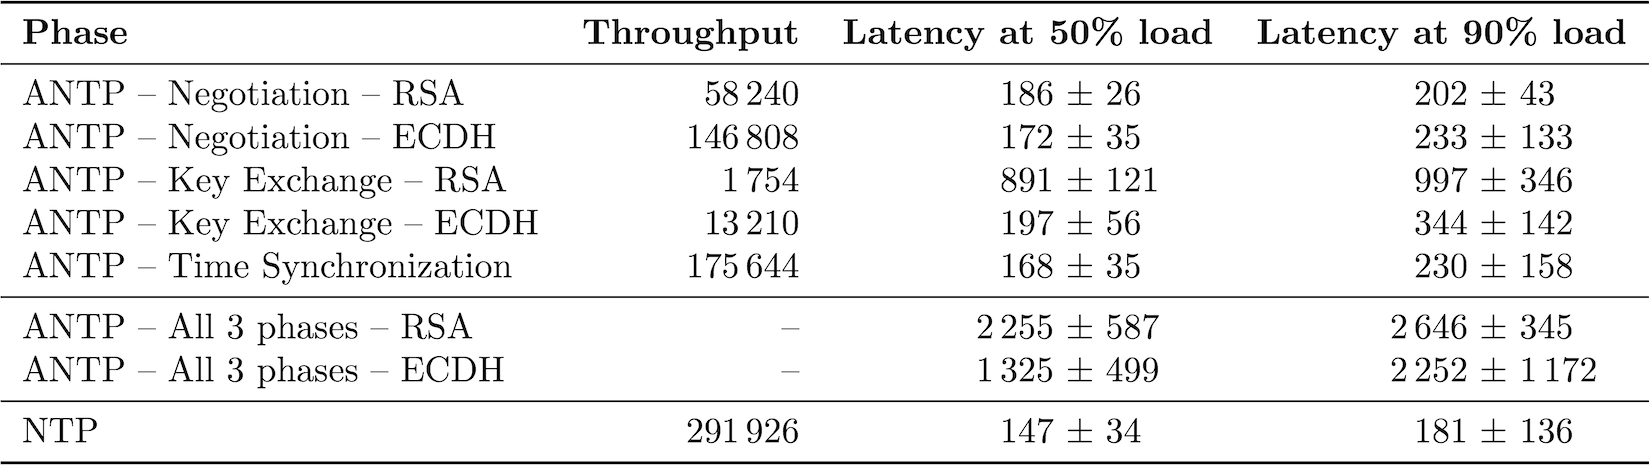 Performance results for each phase of ANTP (top), a complete 3-phase execution of ANTP (middle), and NTP (bottom). <small>Throughput: mean completed phases per second. Latency: mean and standard deviation of the latency in microseconds of server responses at either 50% or 90% server load.</small>